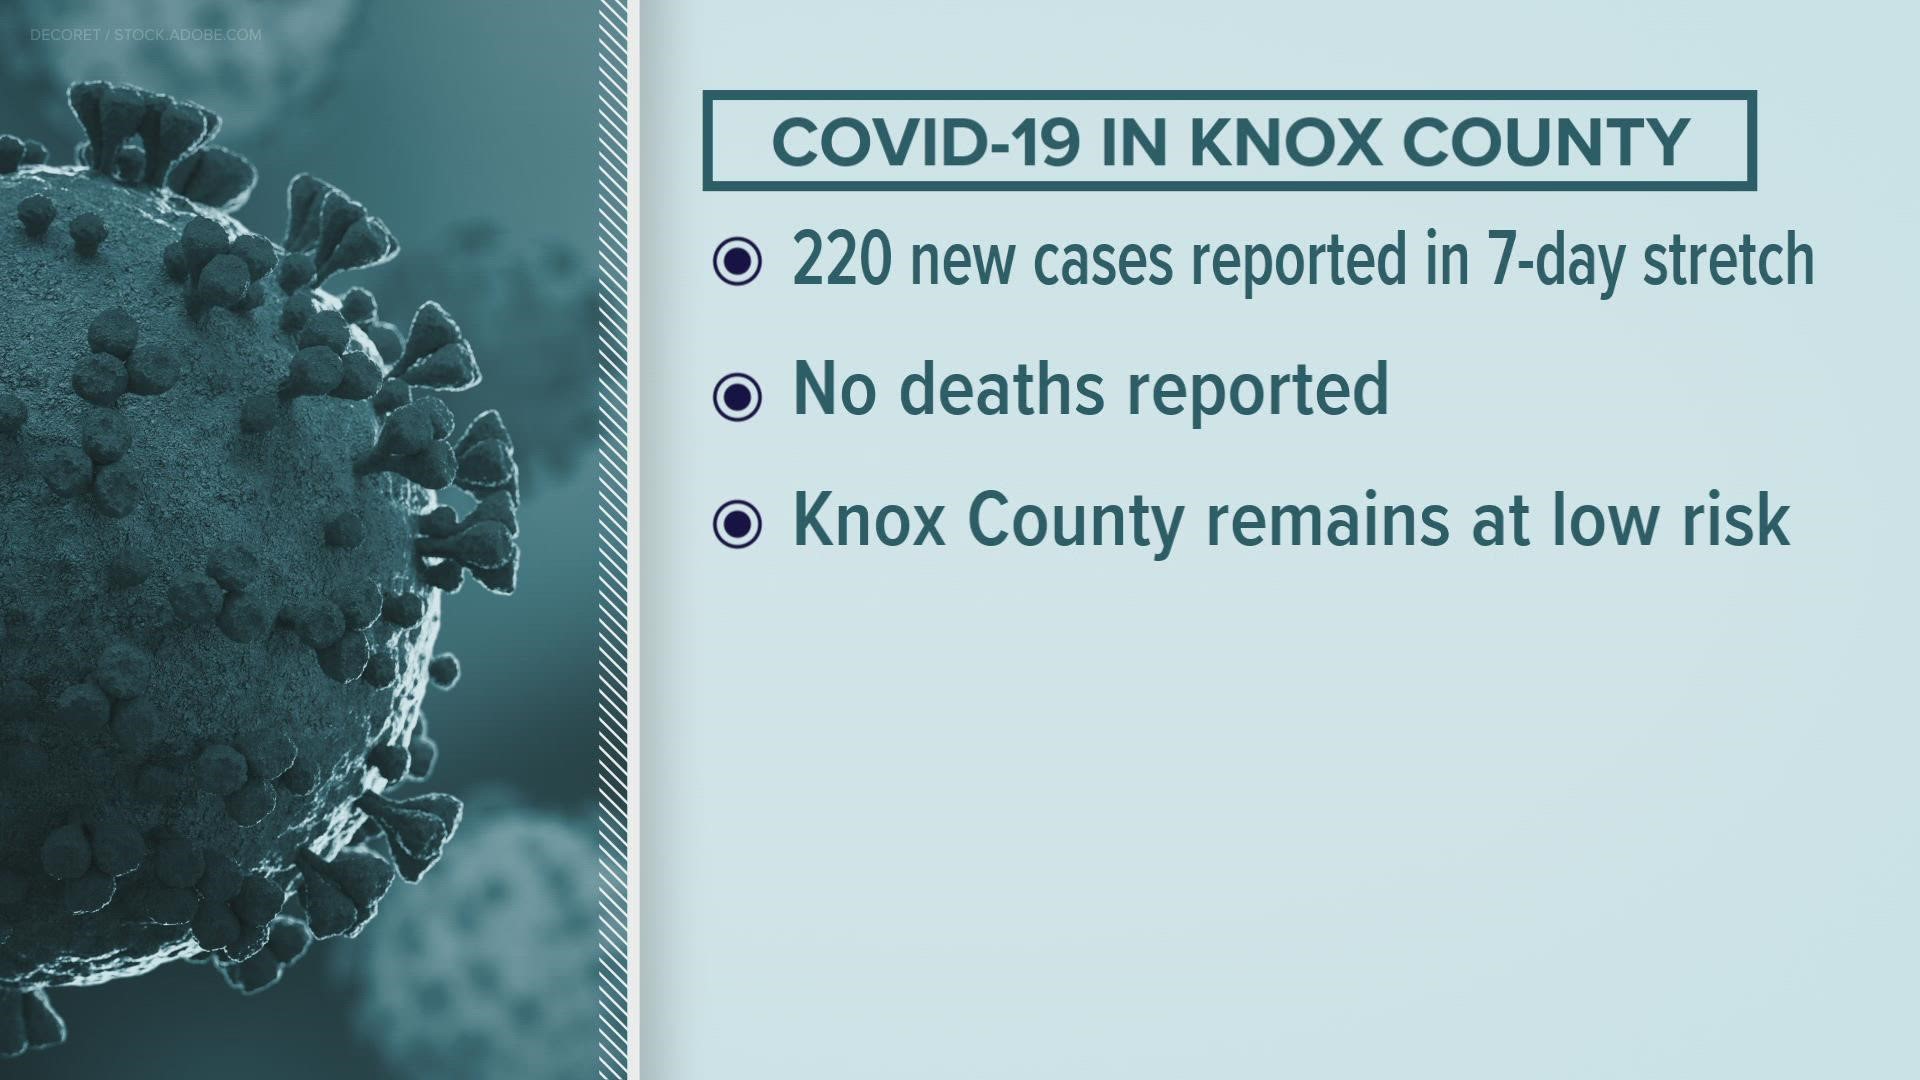 For the week ending October 29, the county reported 220 new cases.